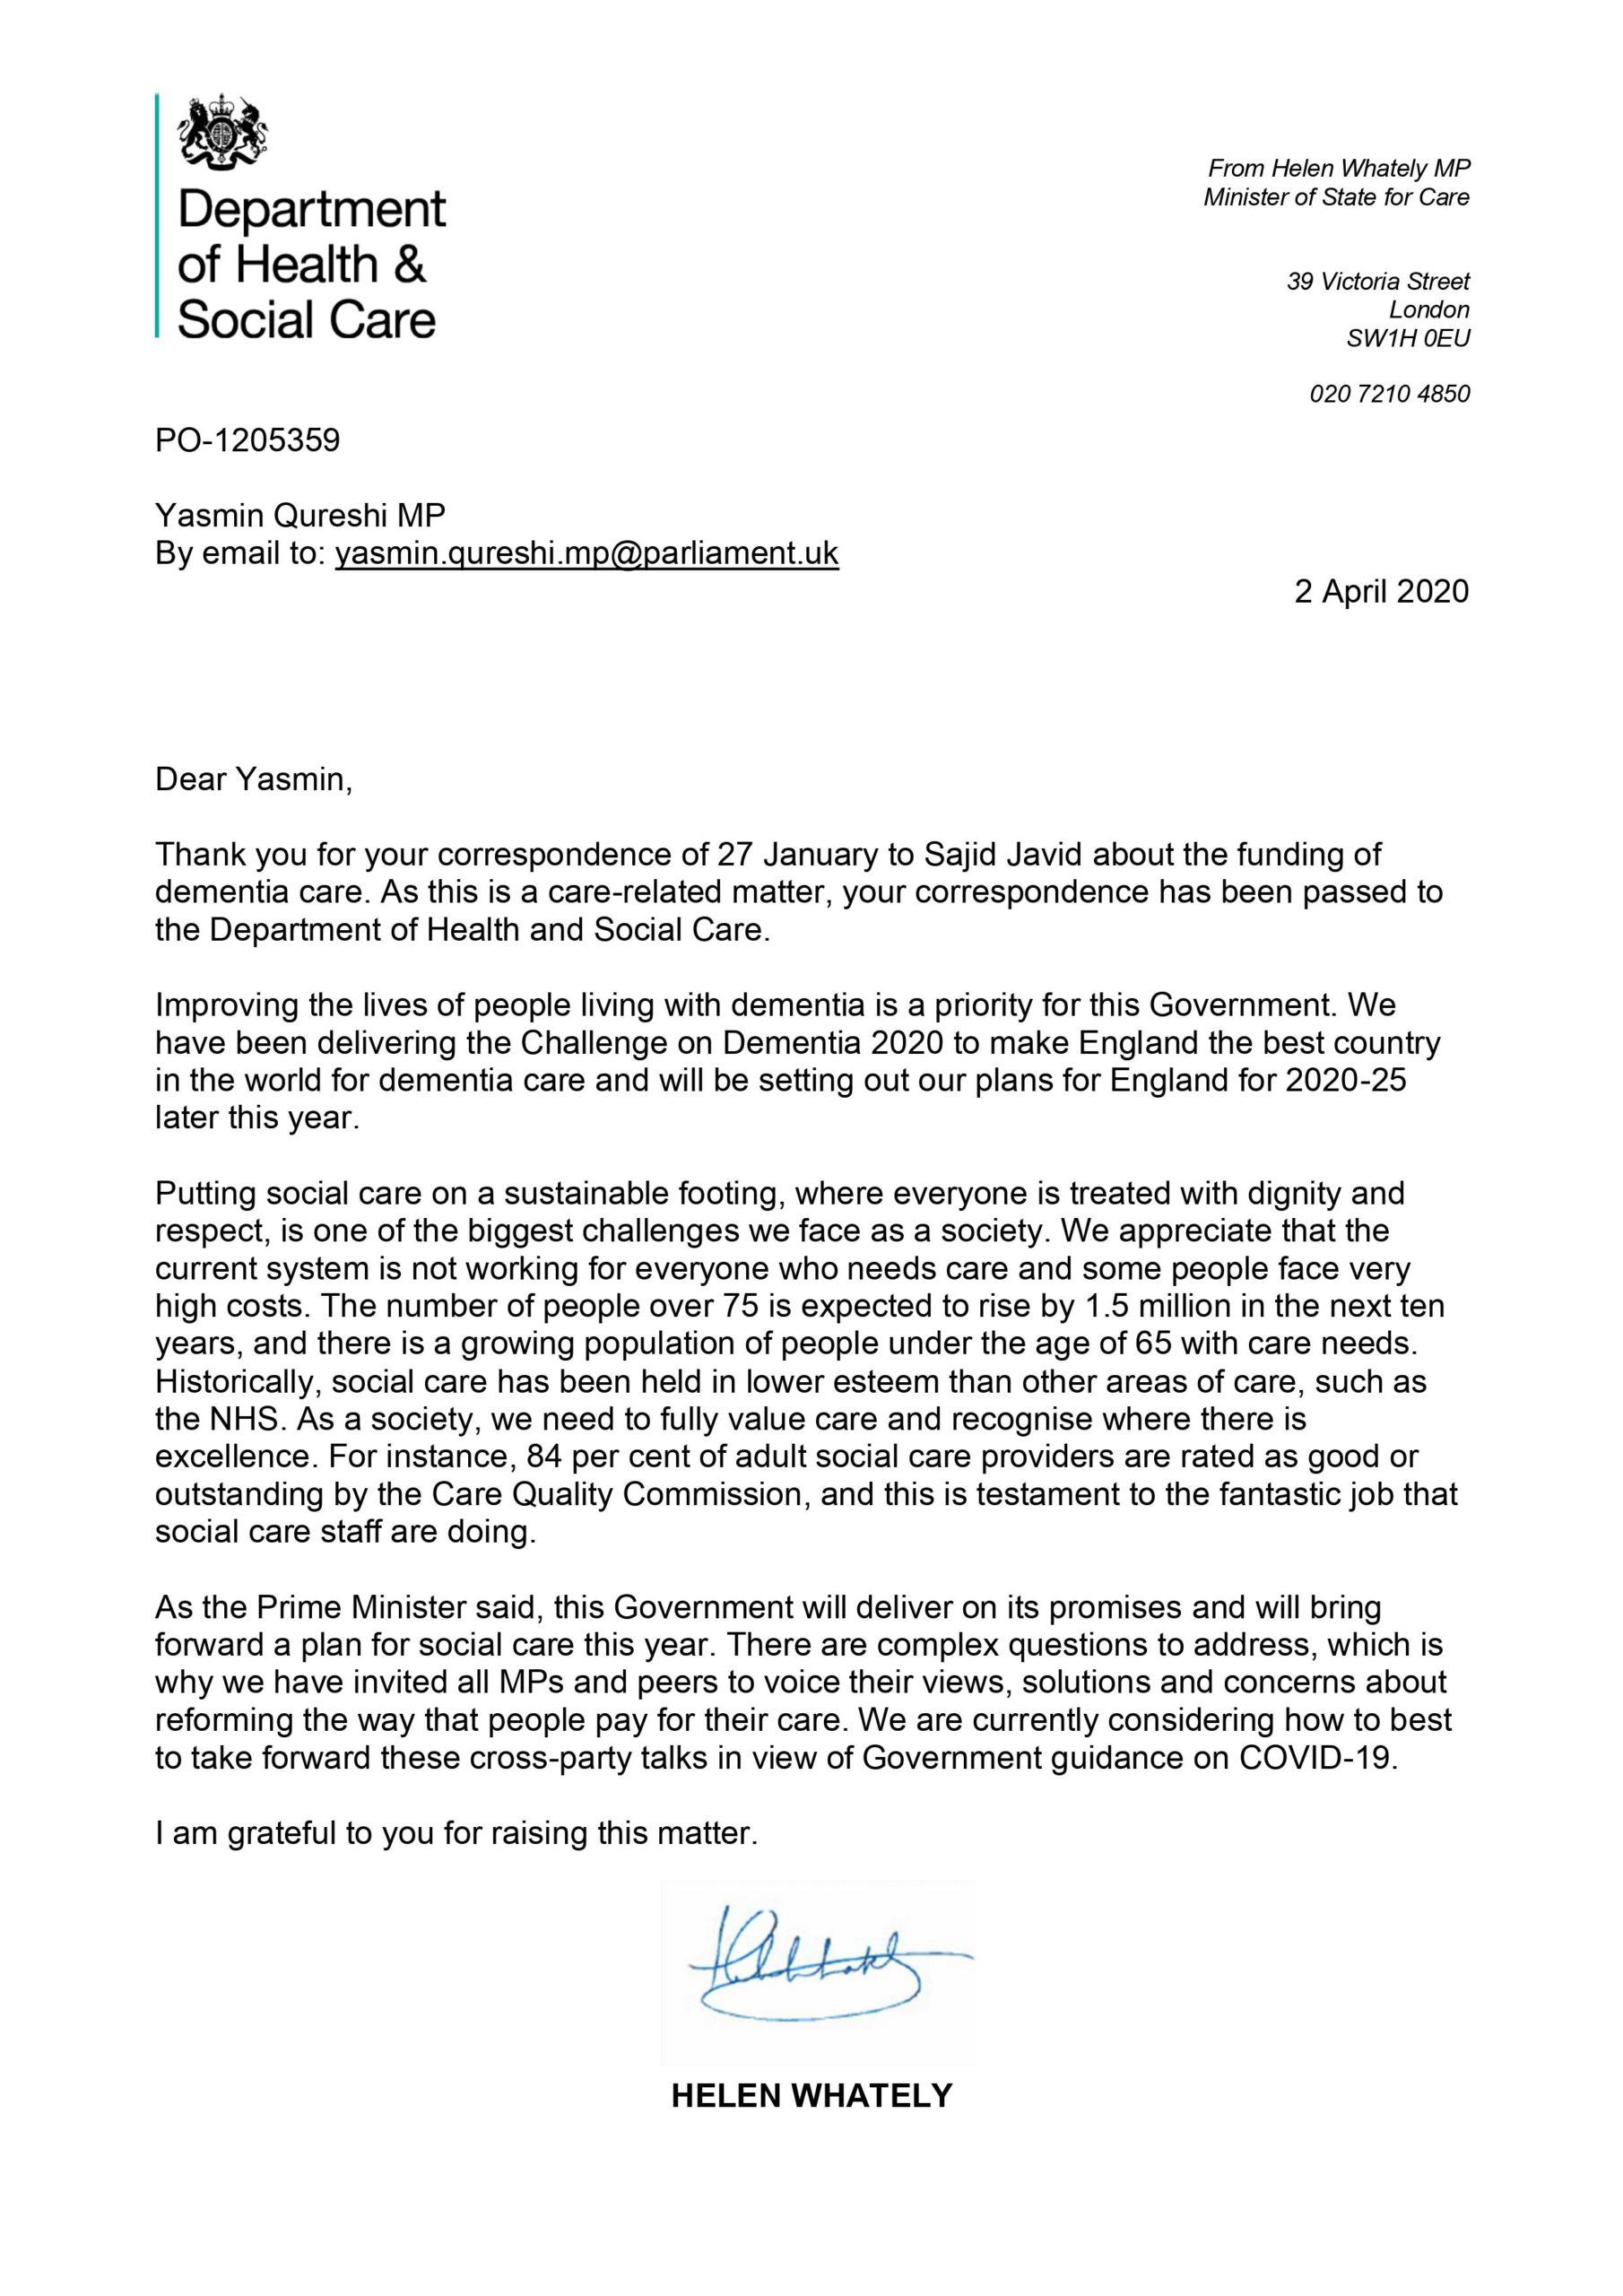 Letter from Helen Whatley MP